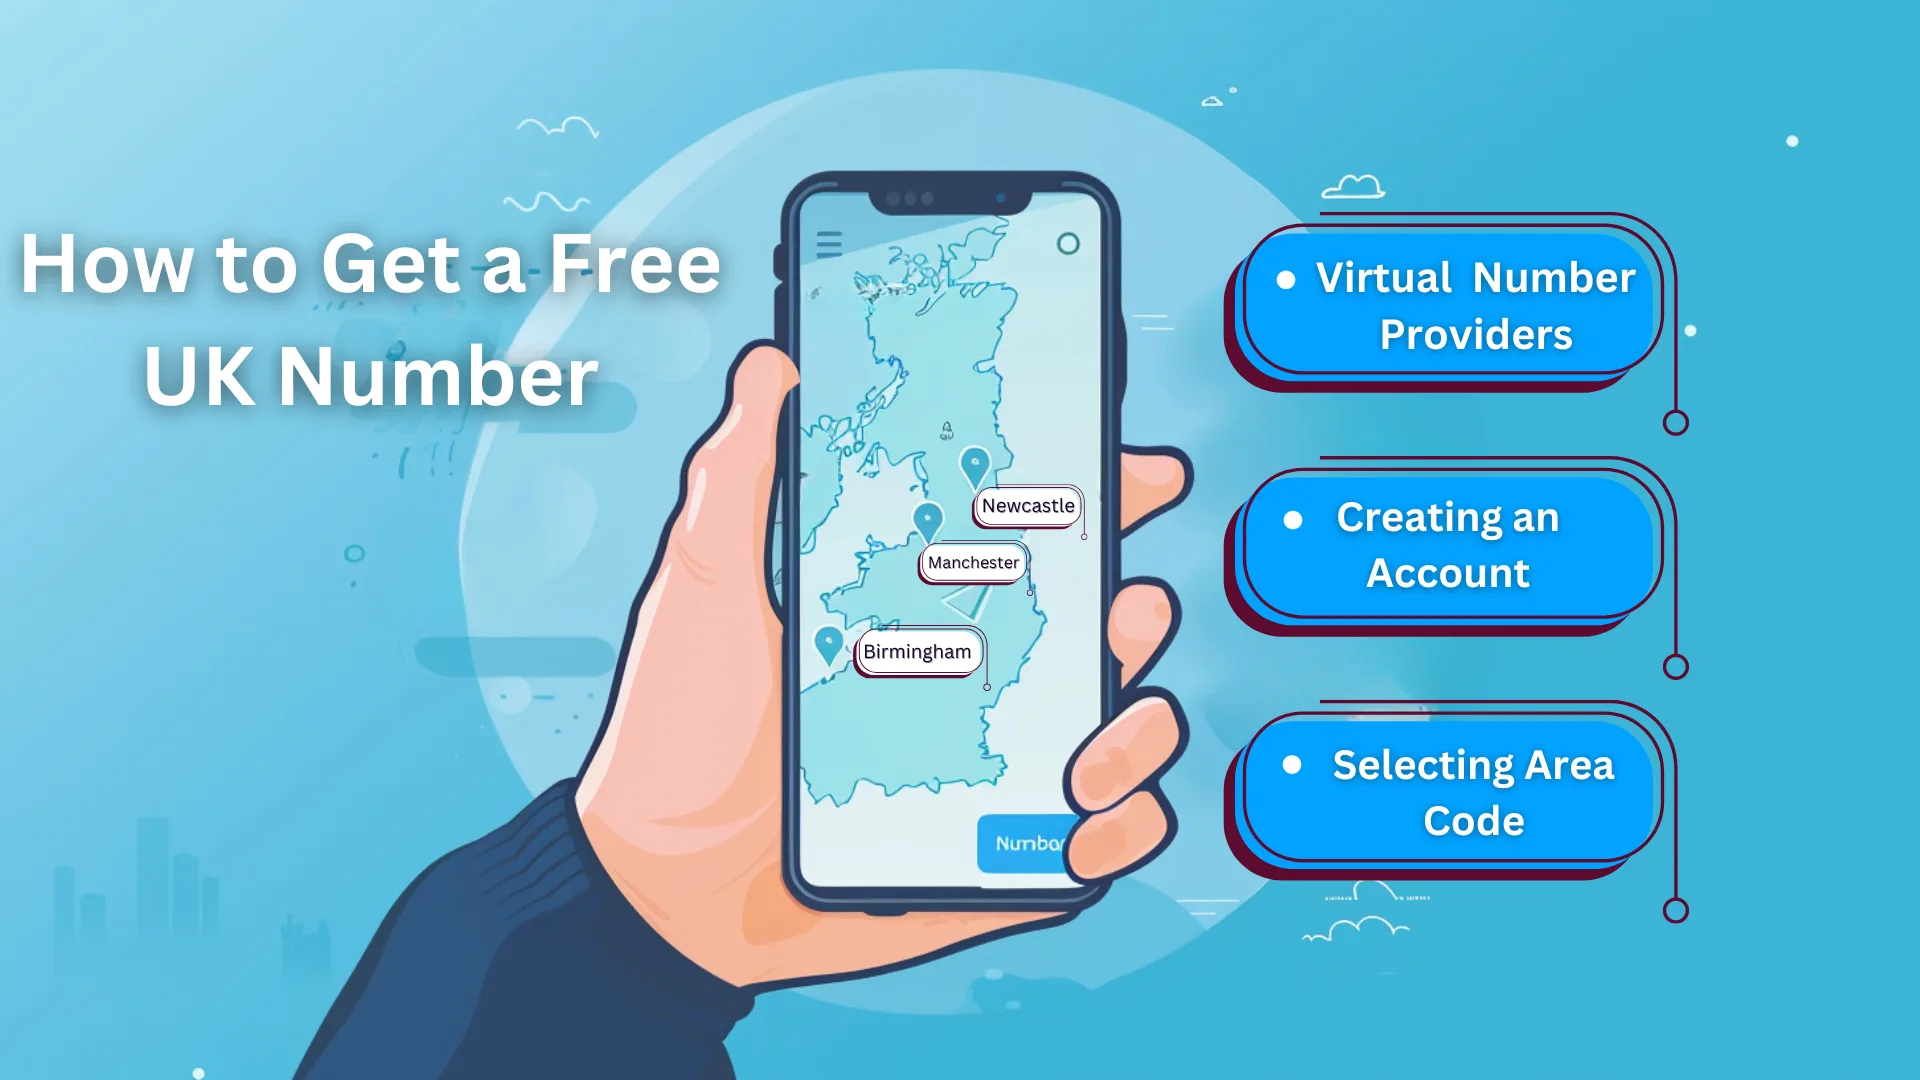 How to Get a Free UK Number